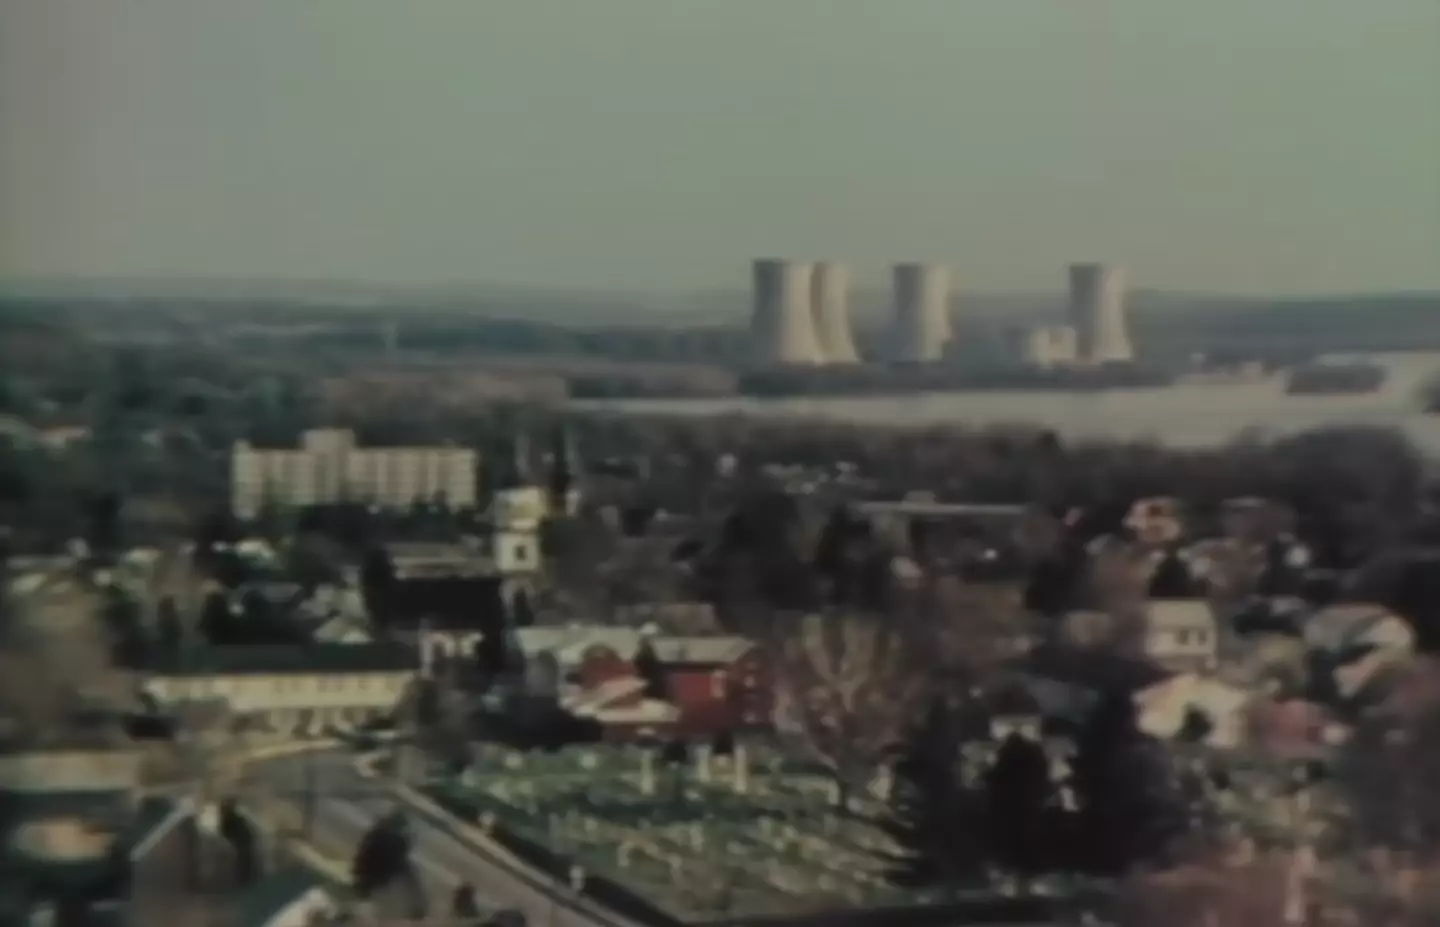 The 1979 incident at Three Mile Island has been dubbed the worst nuclear power plant accident in US history.